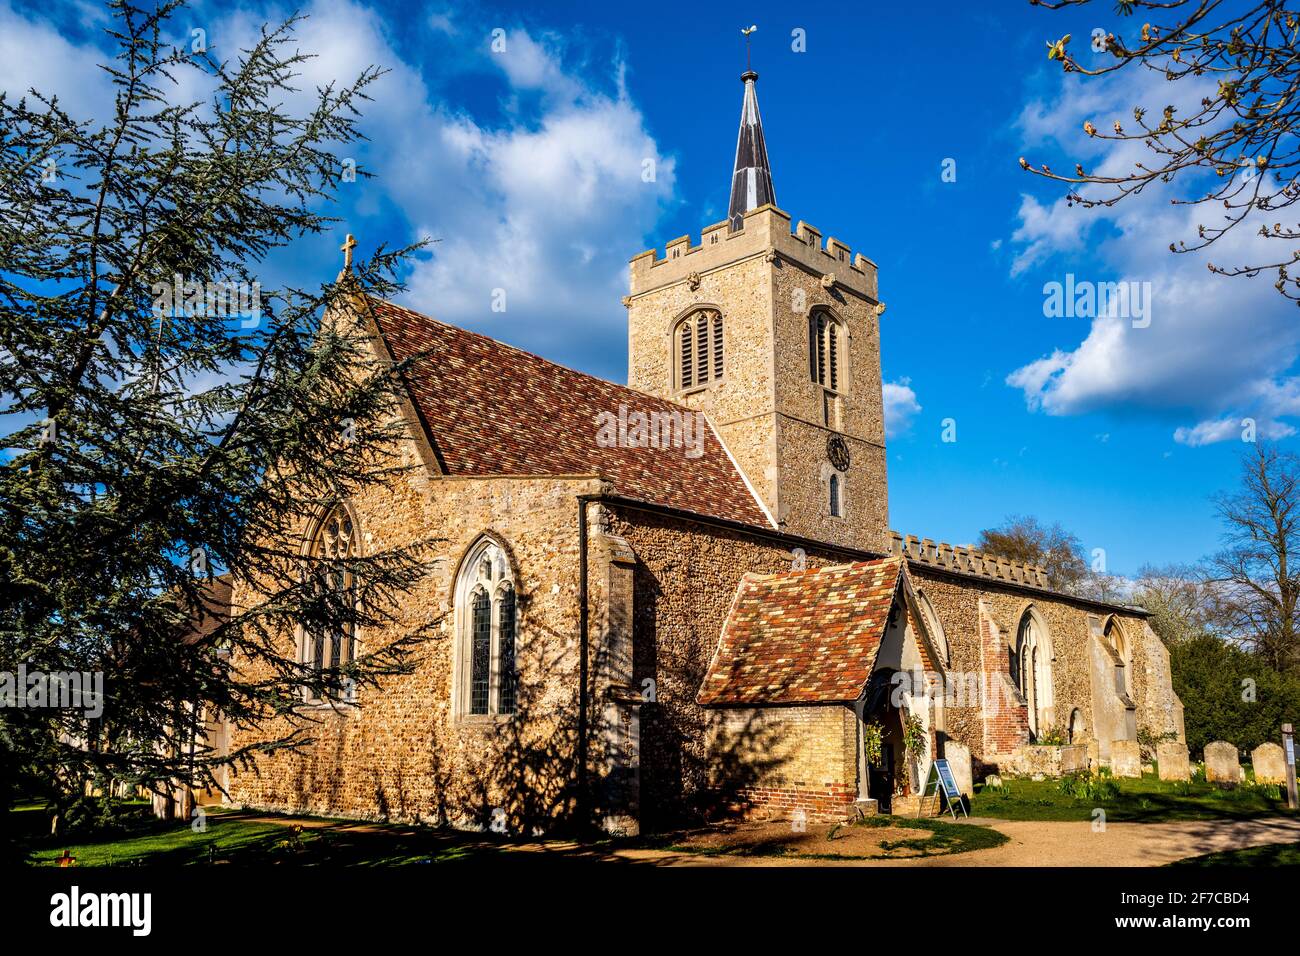 Whittlesford Church. St Mary and St Andrew’s Church Whittlesford Cambridge - first recorded from 1217 but parts believed to be much earlier. Stock Photo